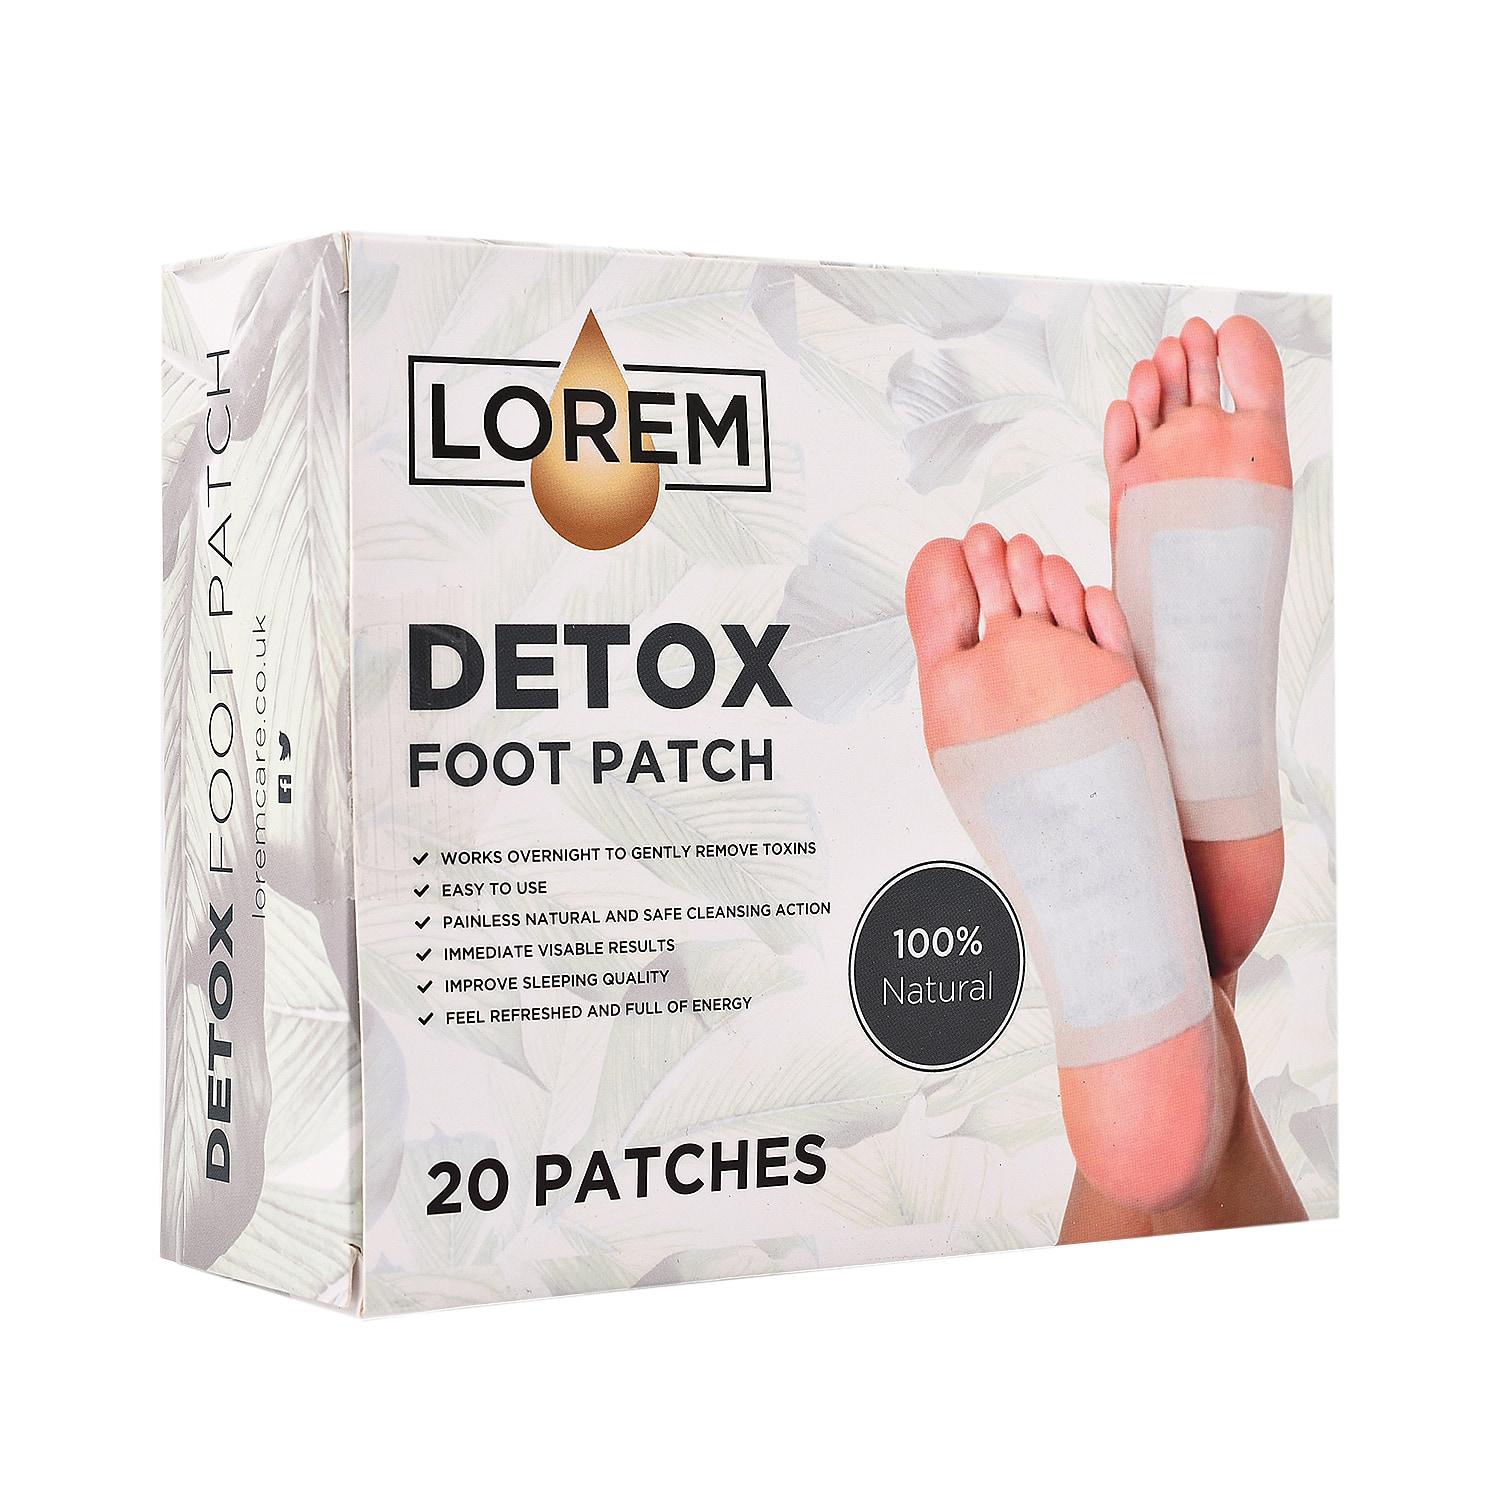 Lorem-Detox-Foot-Patches-Pack-of-20